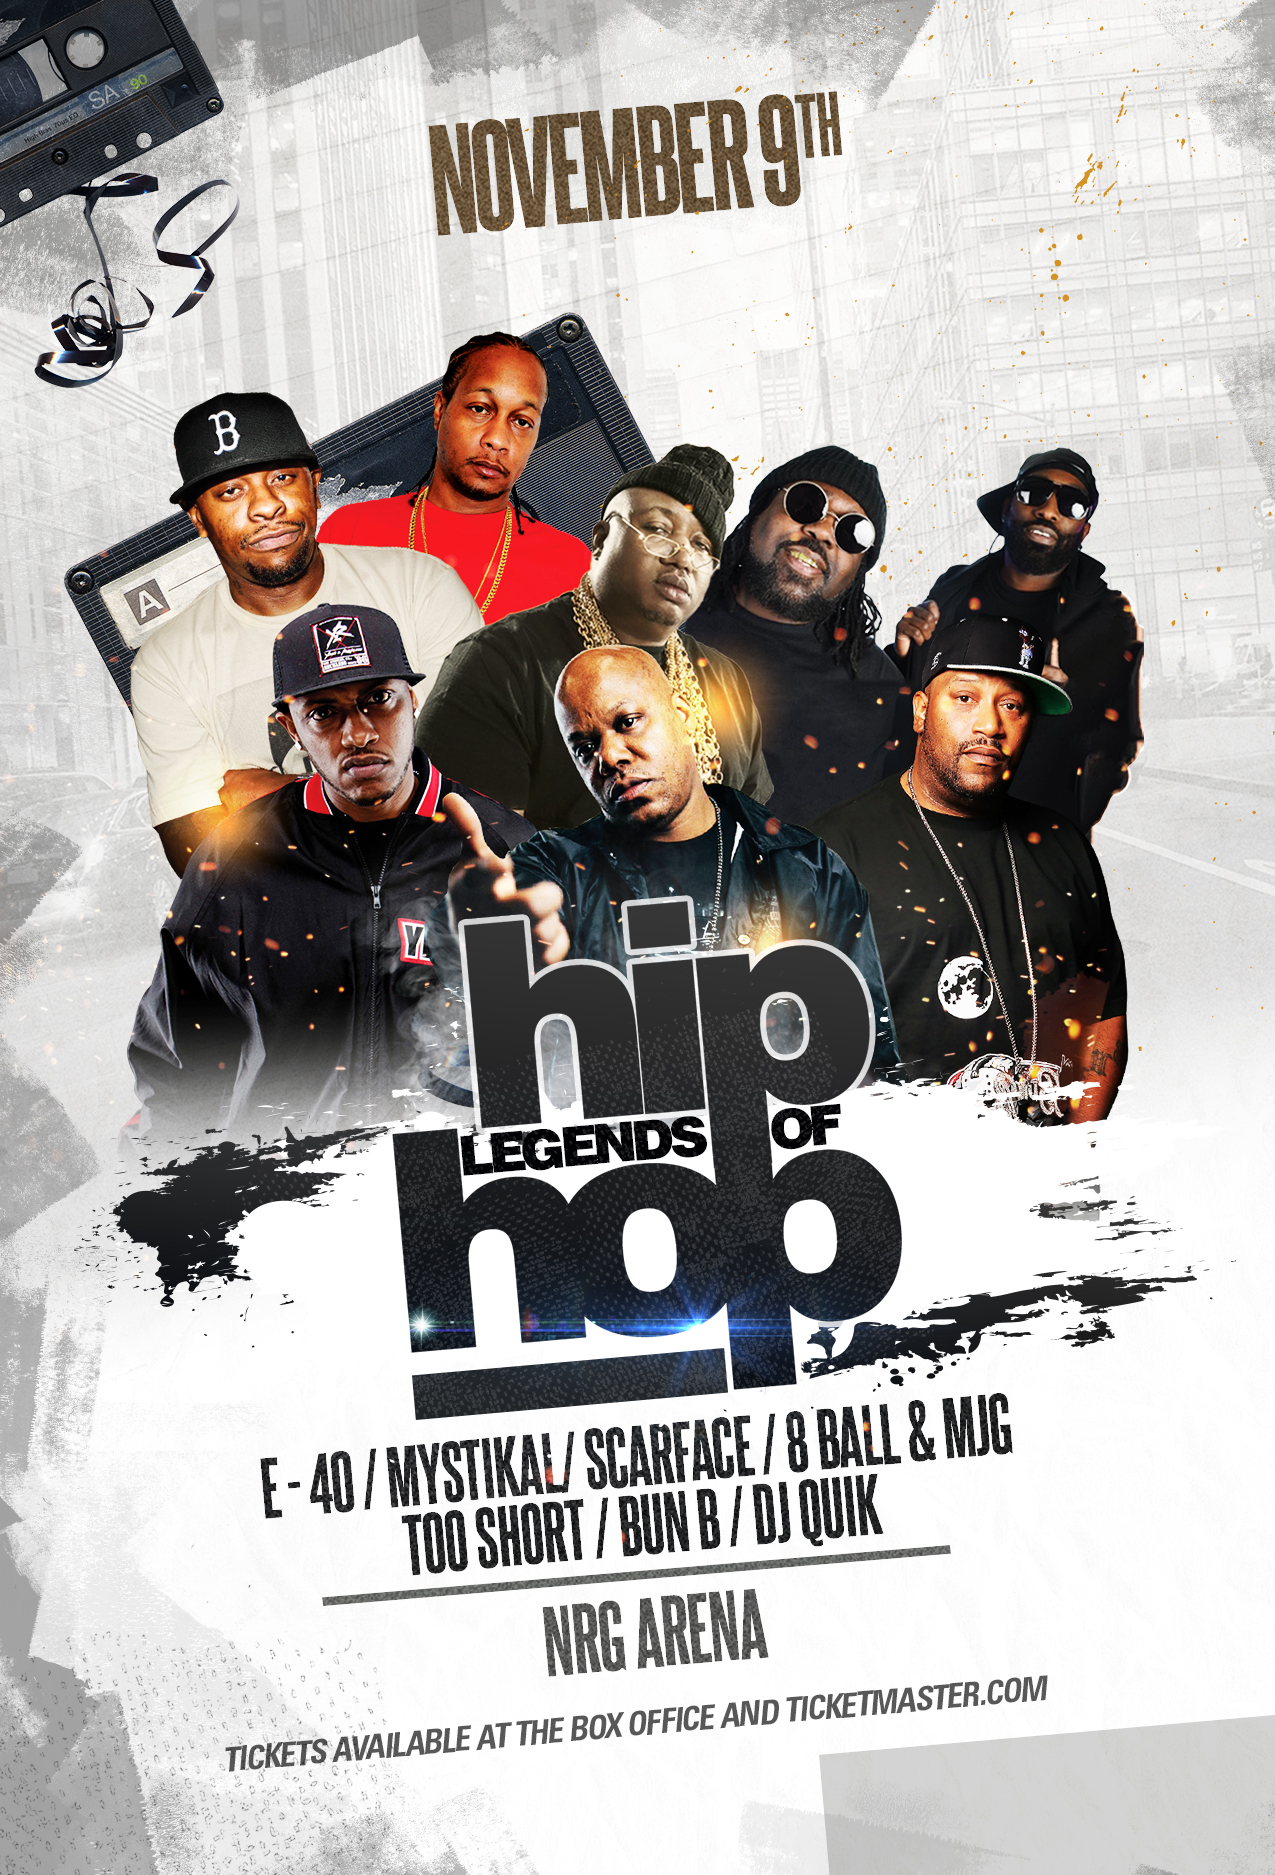 Legends of Hip Hop Show coming to Houston at the NRG Arena on November